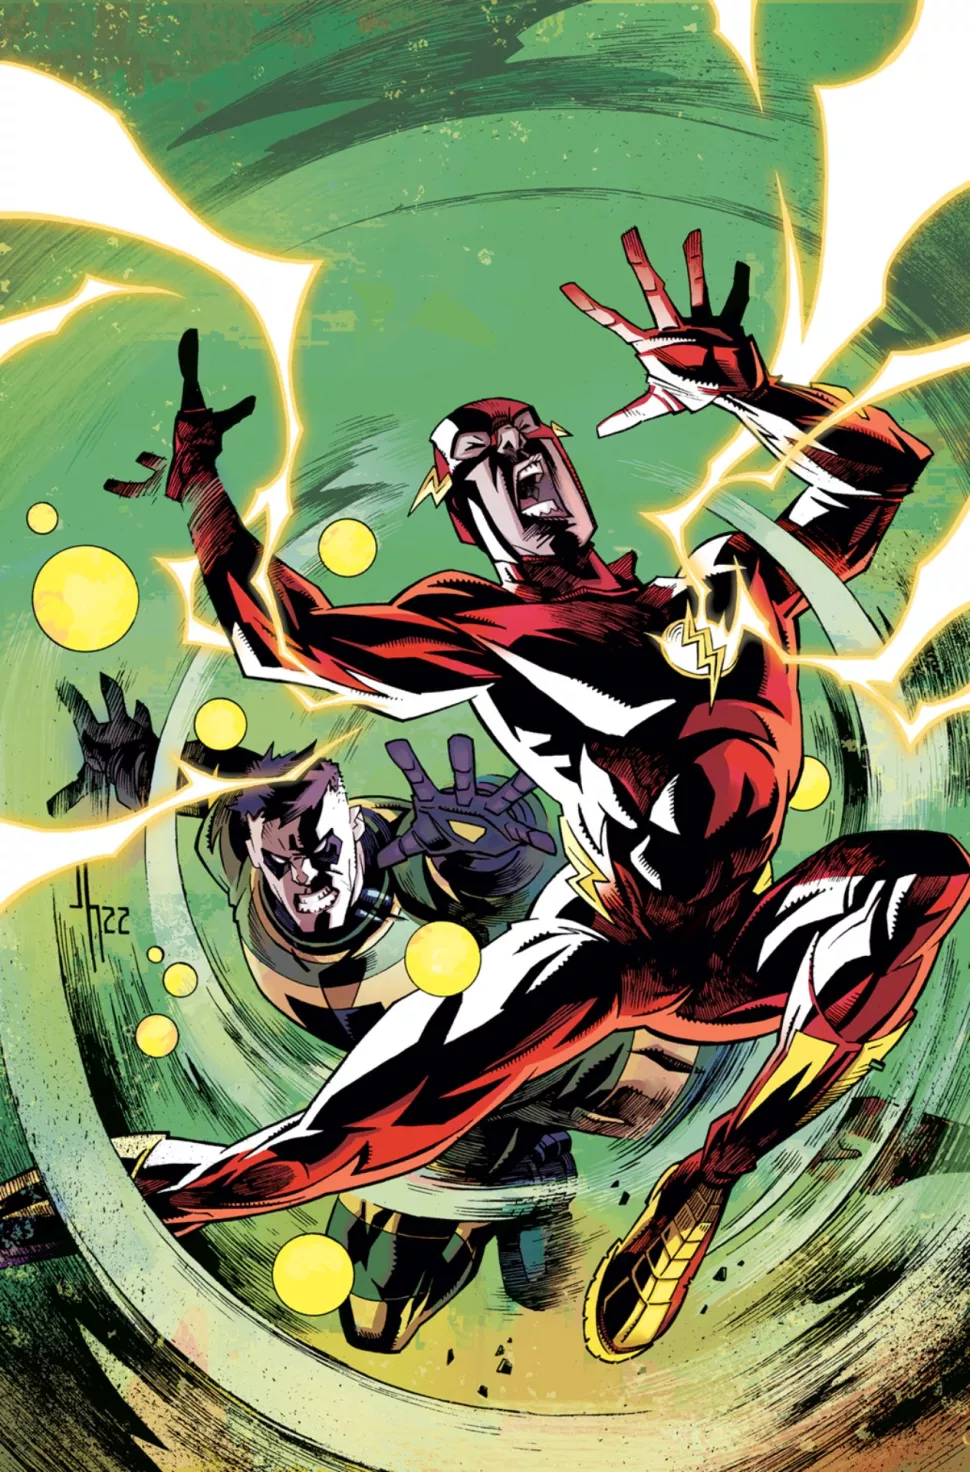 THE FLASH: THE FASTEST MAN ALIVE #3